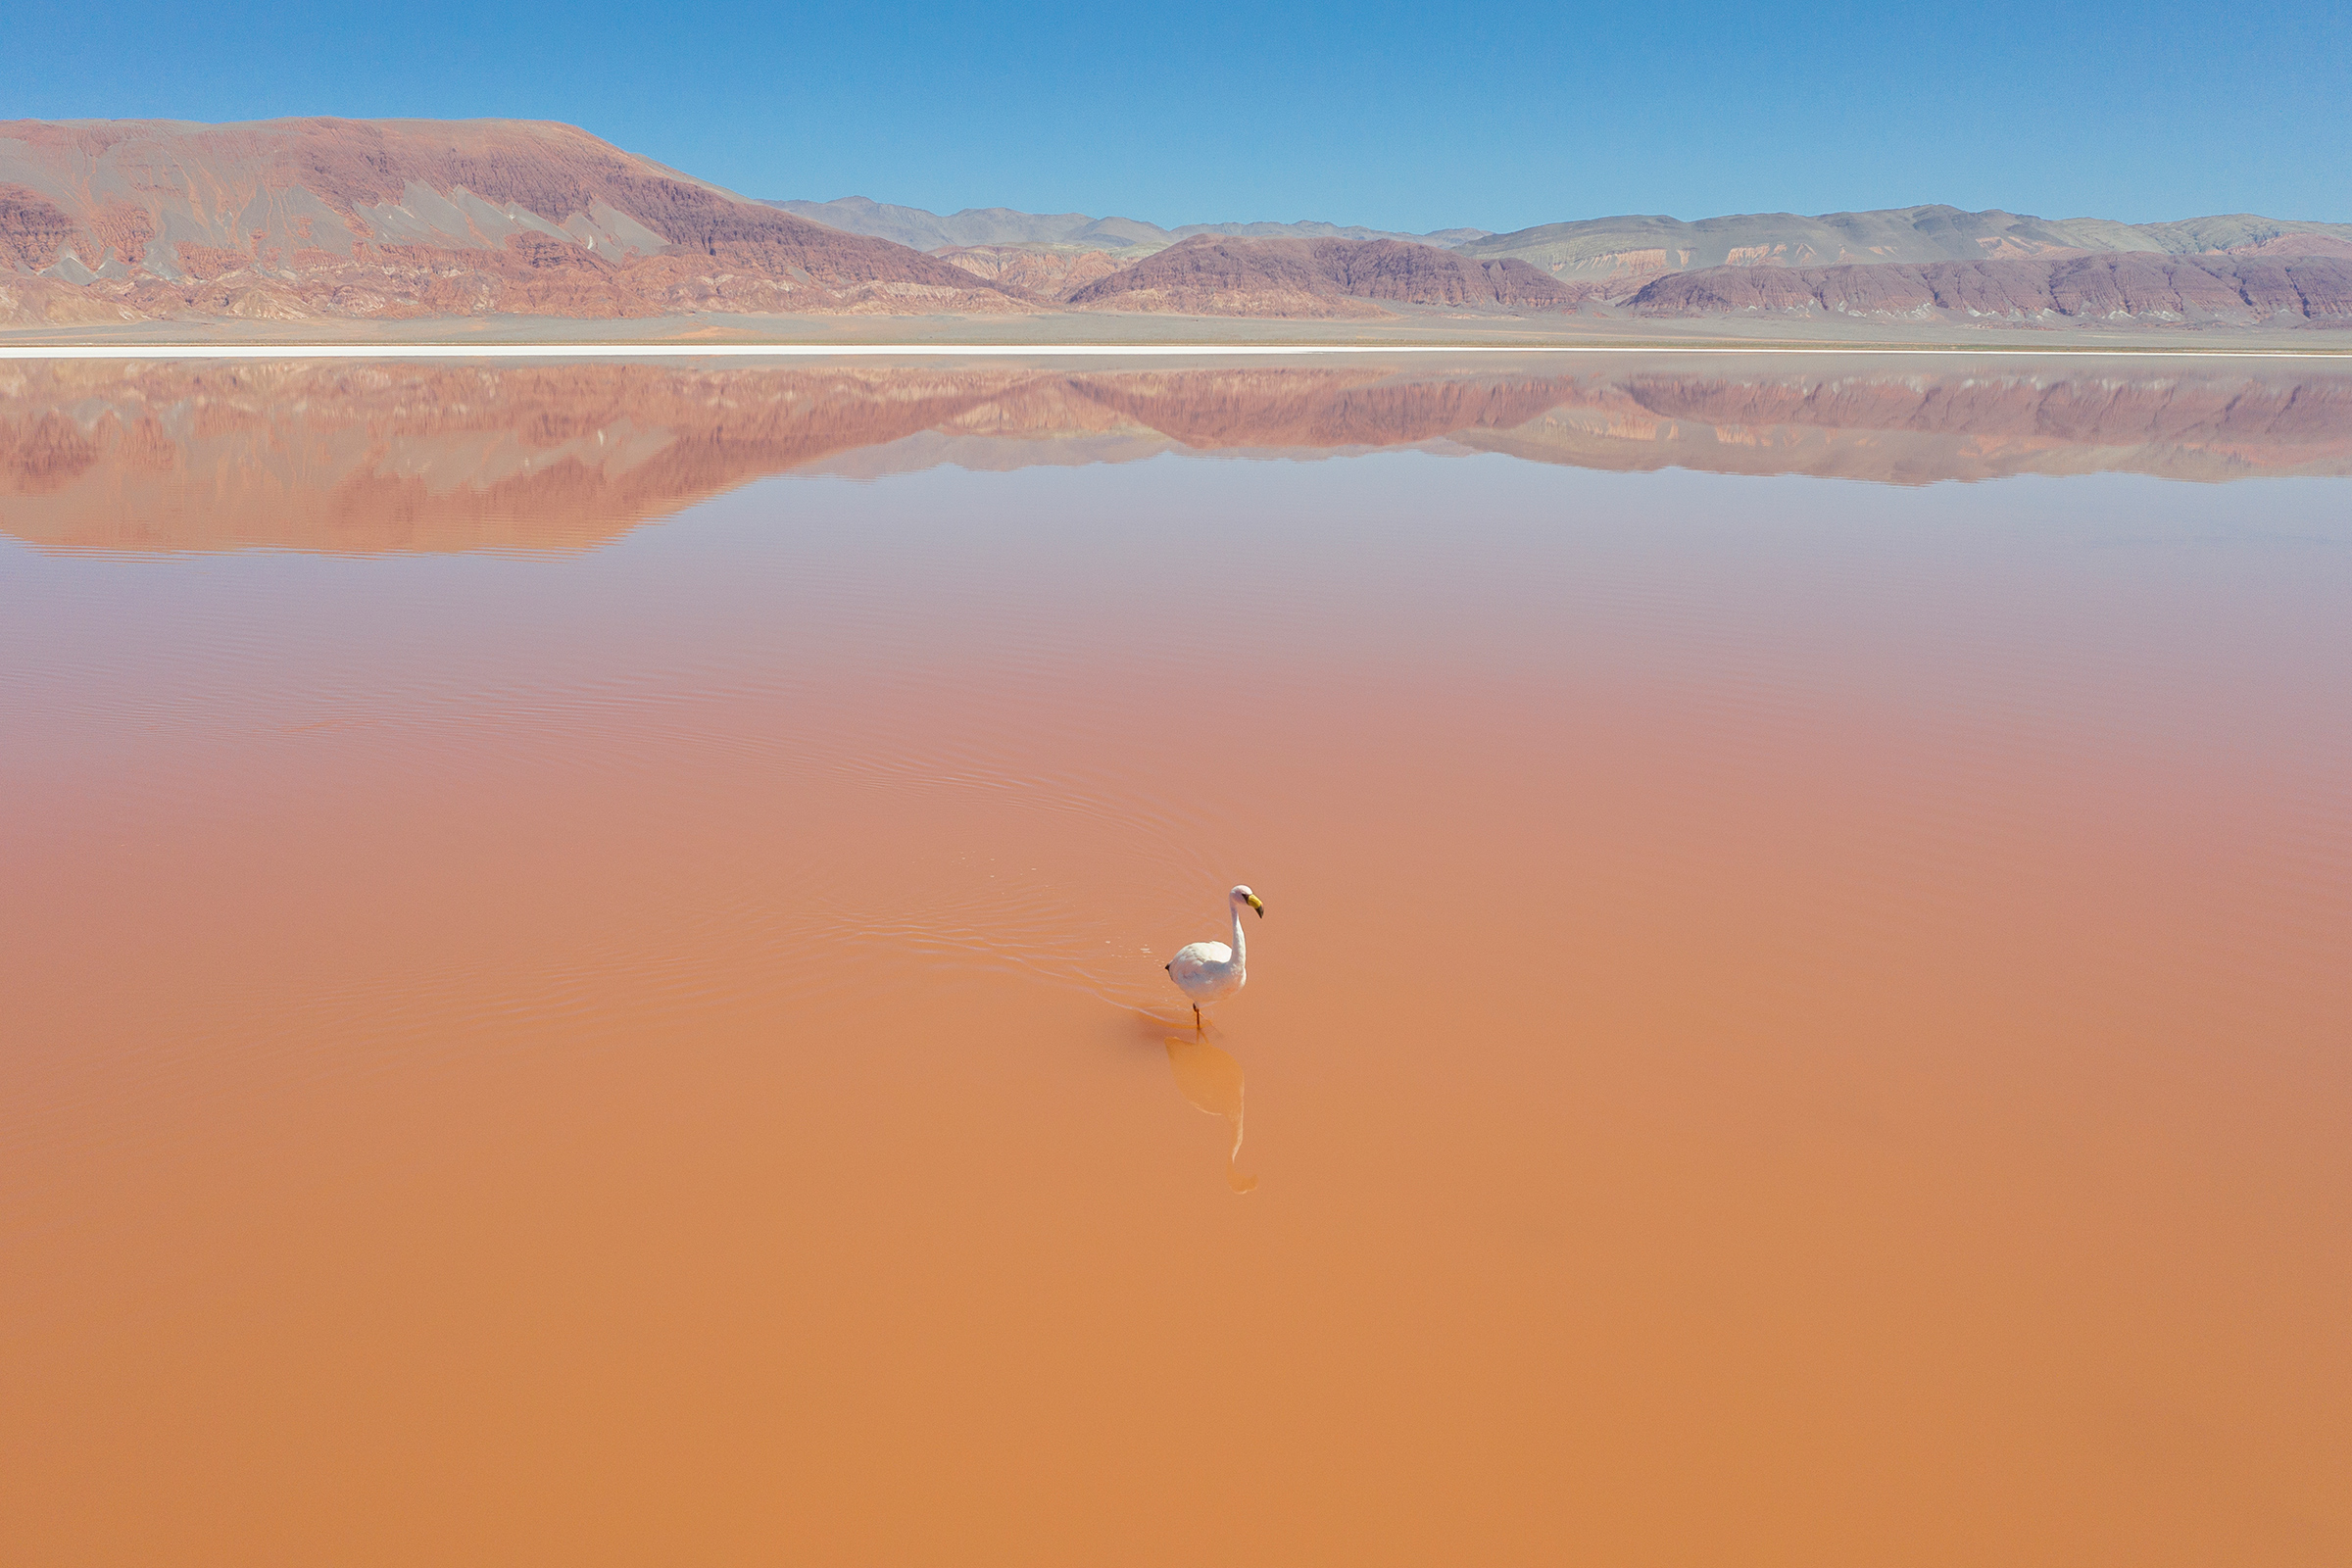 Flamingos found in the brine lagoon near where Lake Resources' Kachi project will be developed. Mining expansion in the Andes could affect a fragile ecosystem home to flamingoes and other animals. (Sebastián López Brach for TIME)